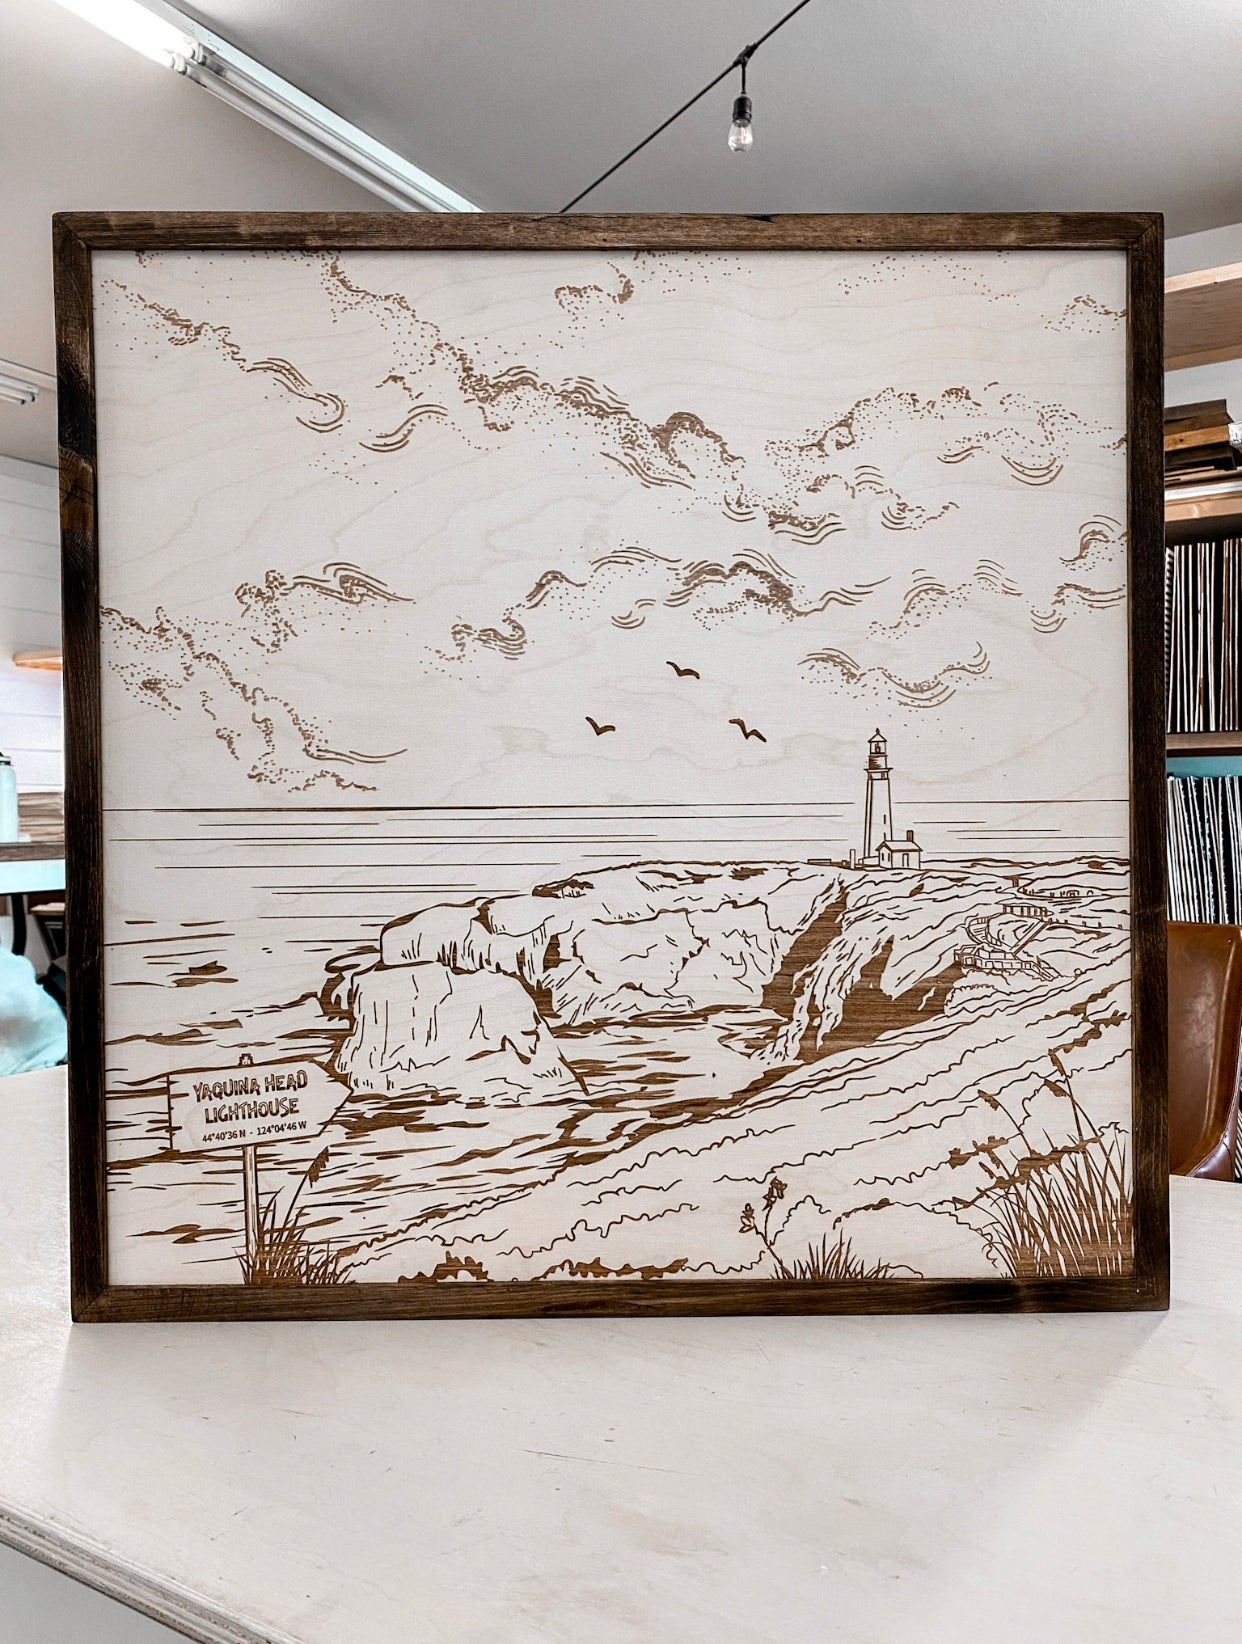 Yaquina Head Lighthouse Hand Sketched Engraved Wooden Artwork